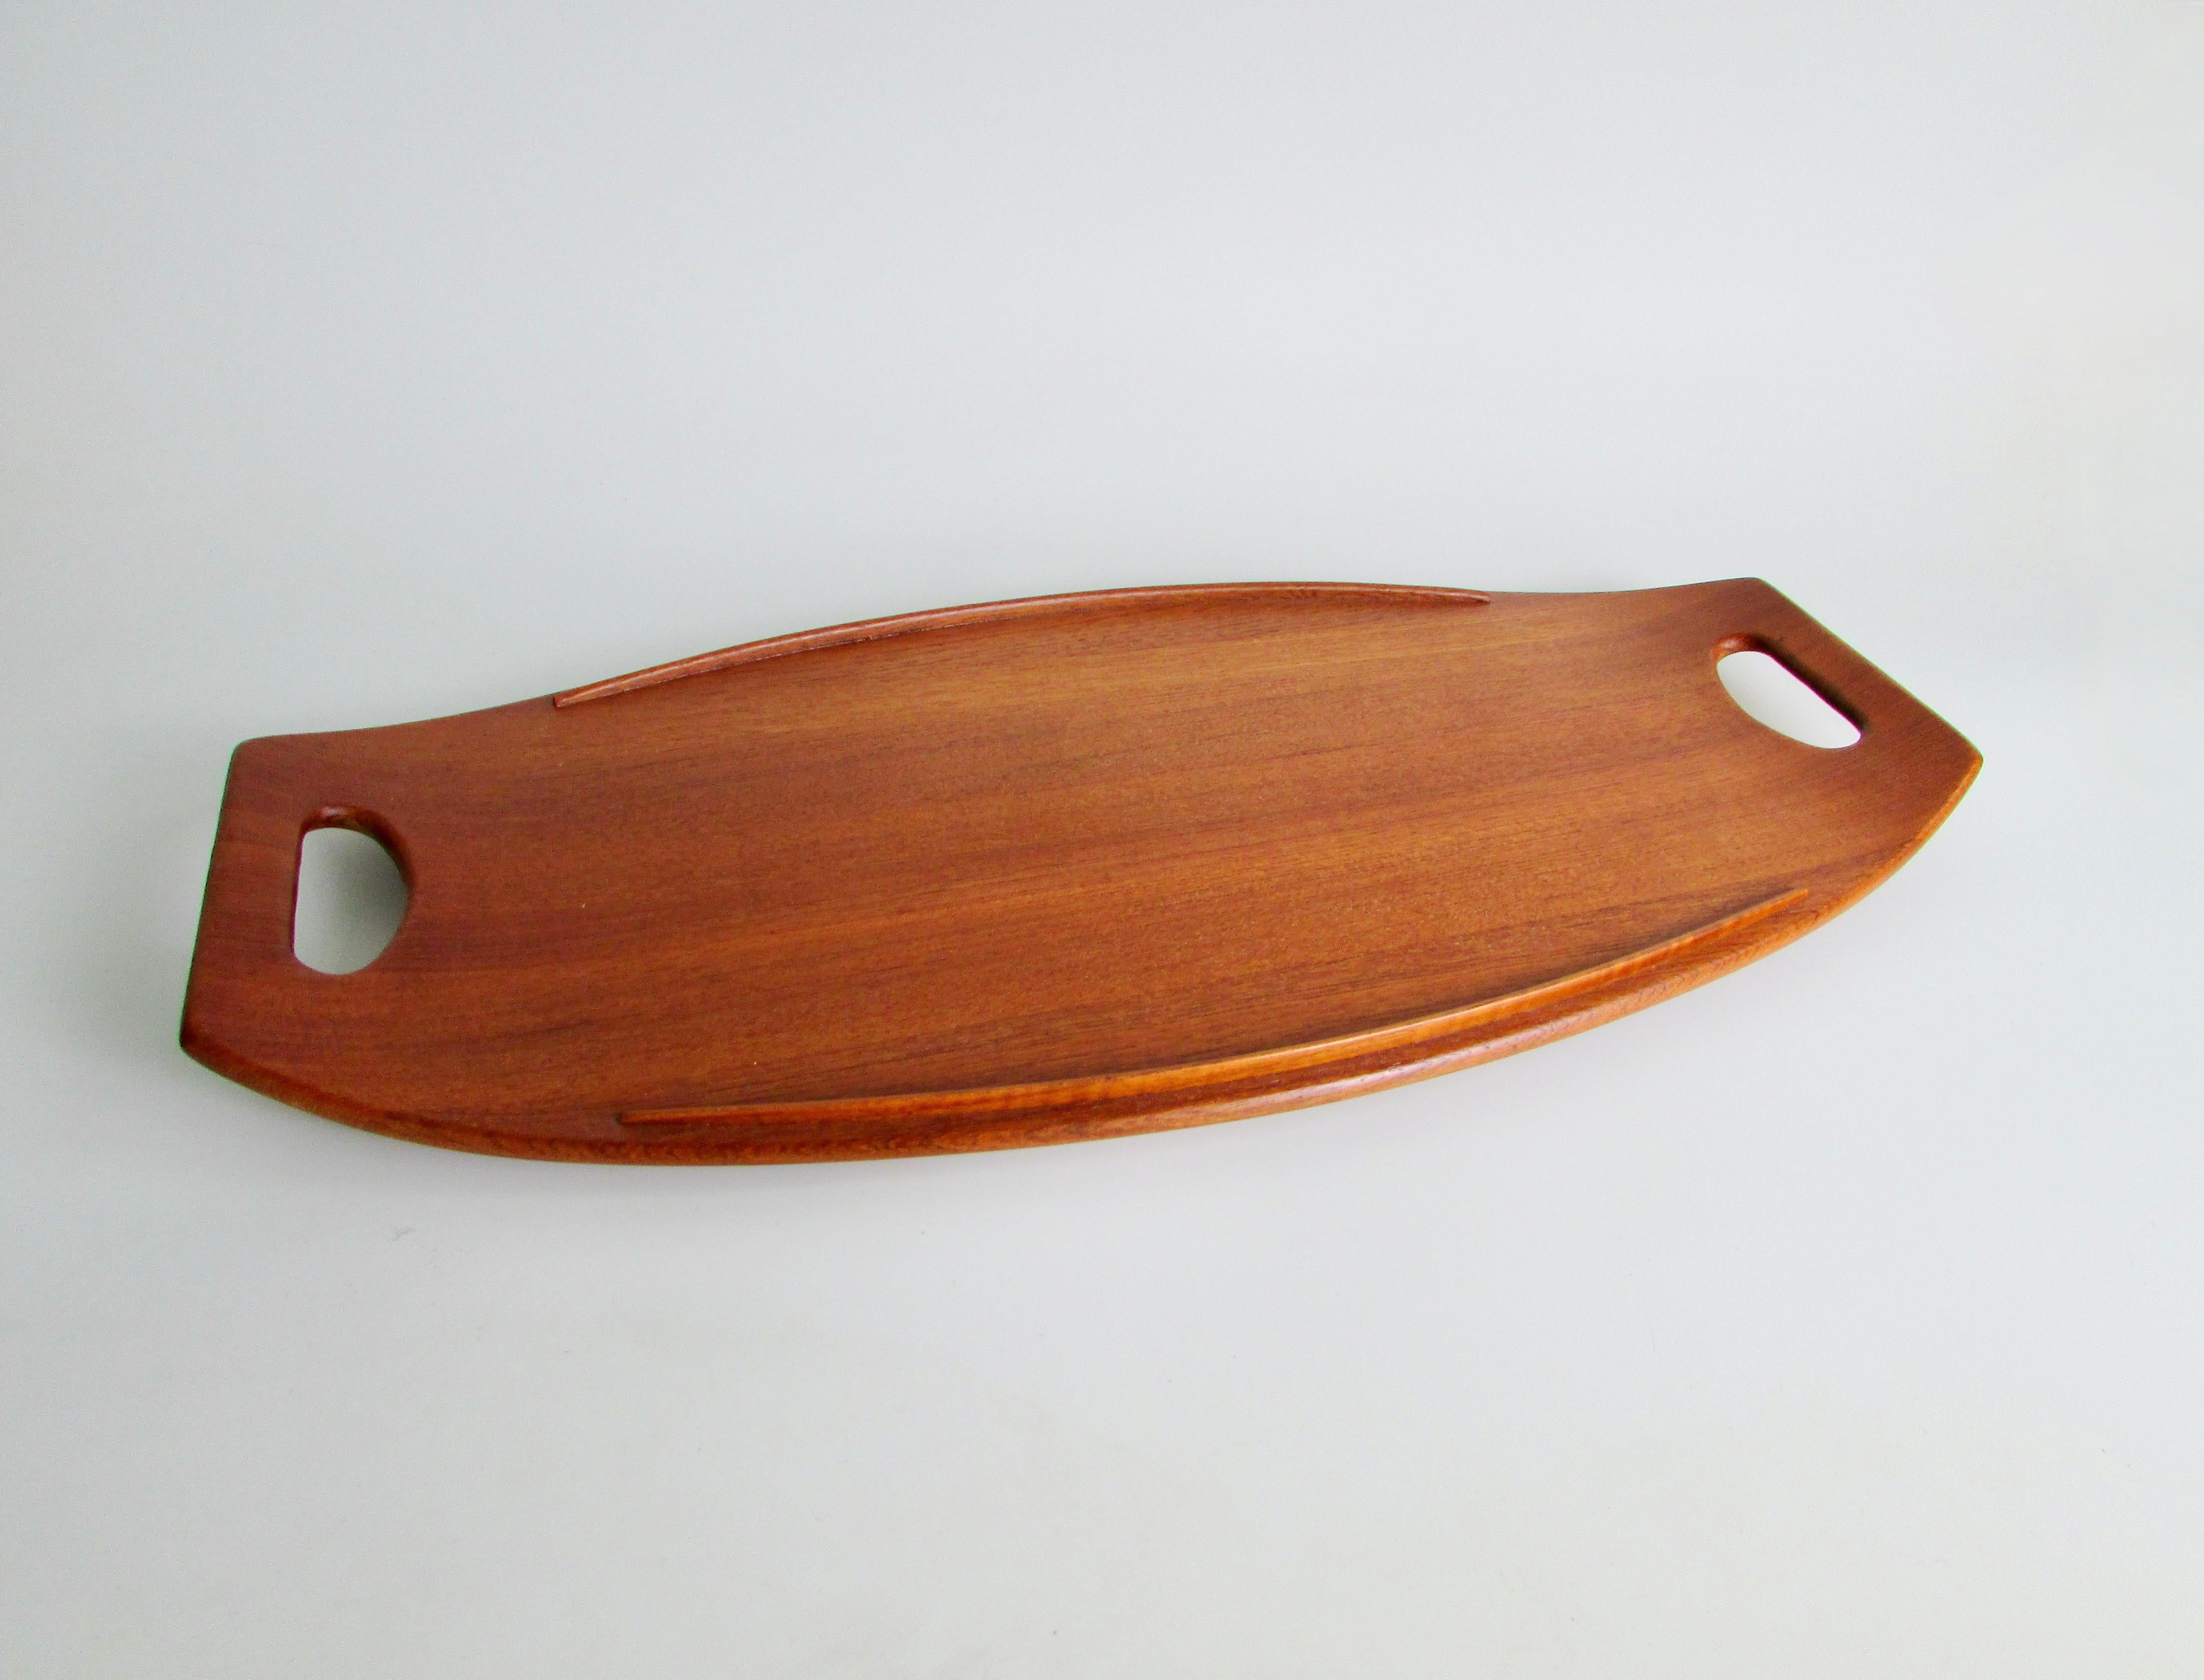   Dansk teak tray with duck logo marked Dansk Designs JHQ  Denmark   . Very nice possibly un touched condition. Fine sculptural and functional teak tray in fine condition .